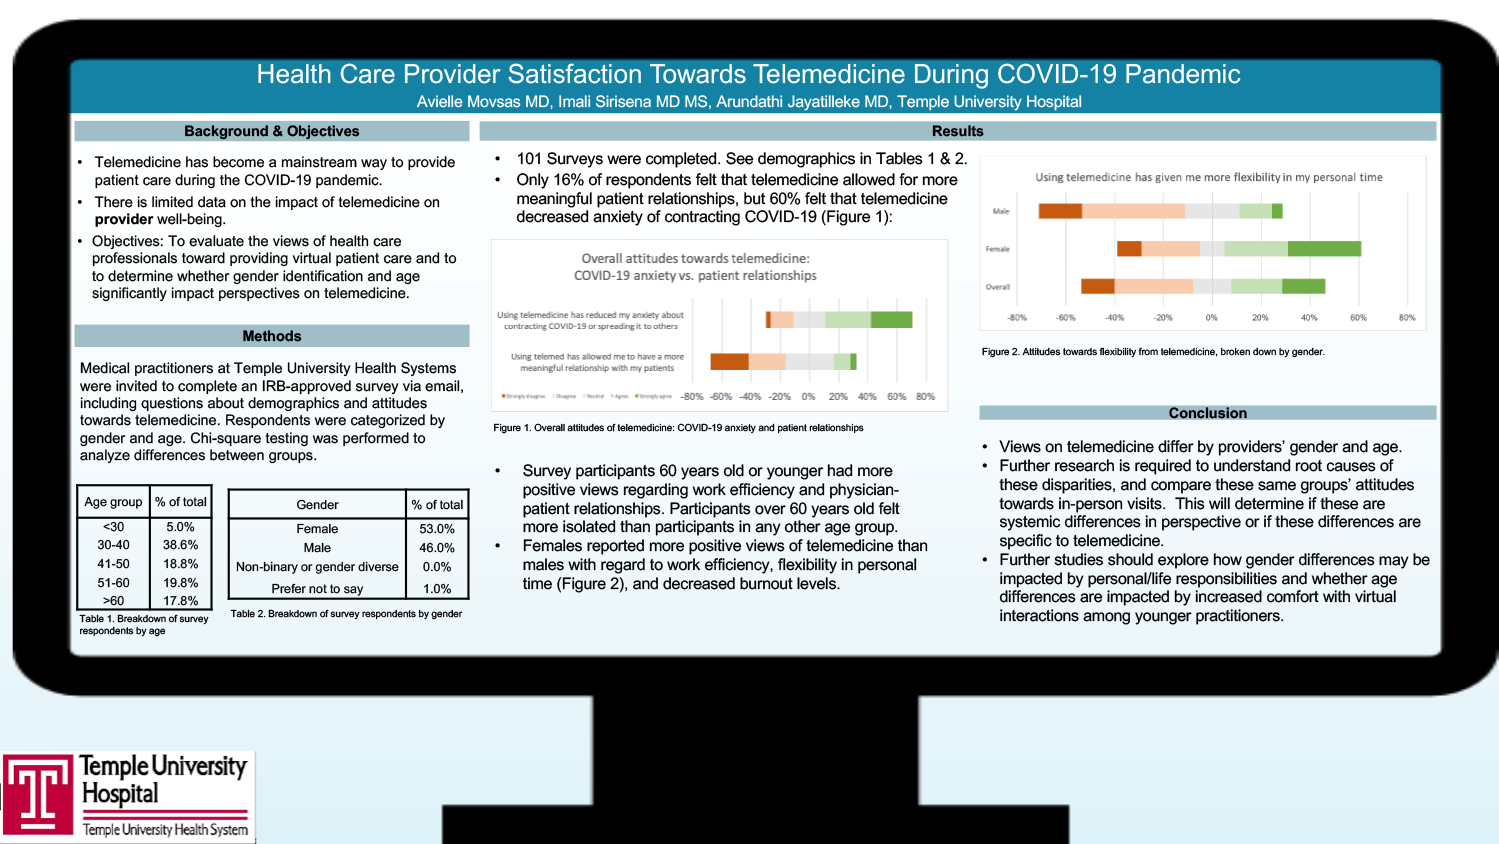 Avielle Movsas - PAS-45-Health-Care-Provider-Satisfaction-Towards-Telemedicine-During-COVID-19-Pandemic